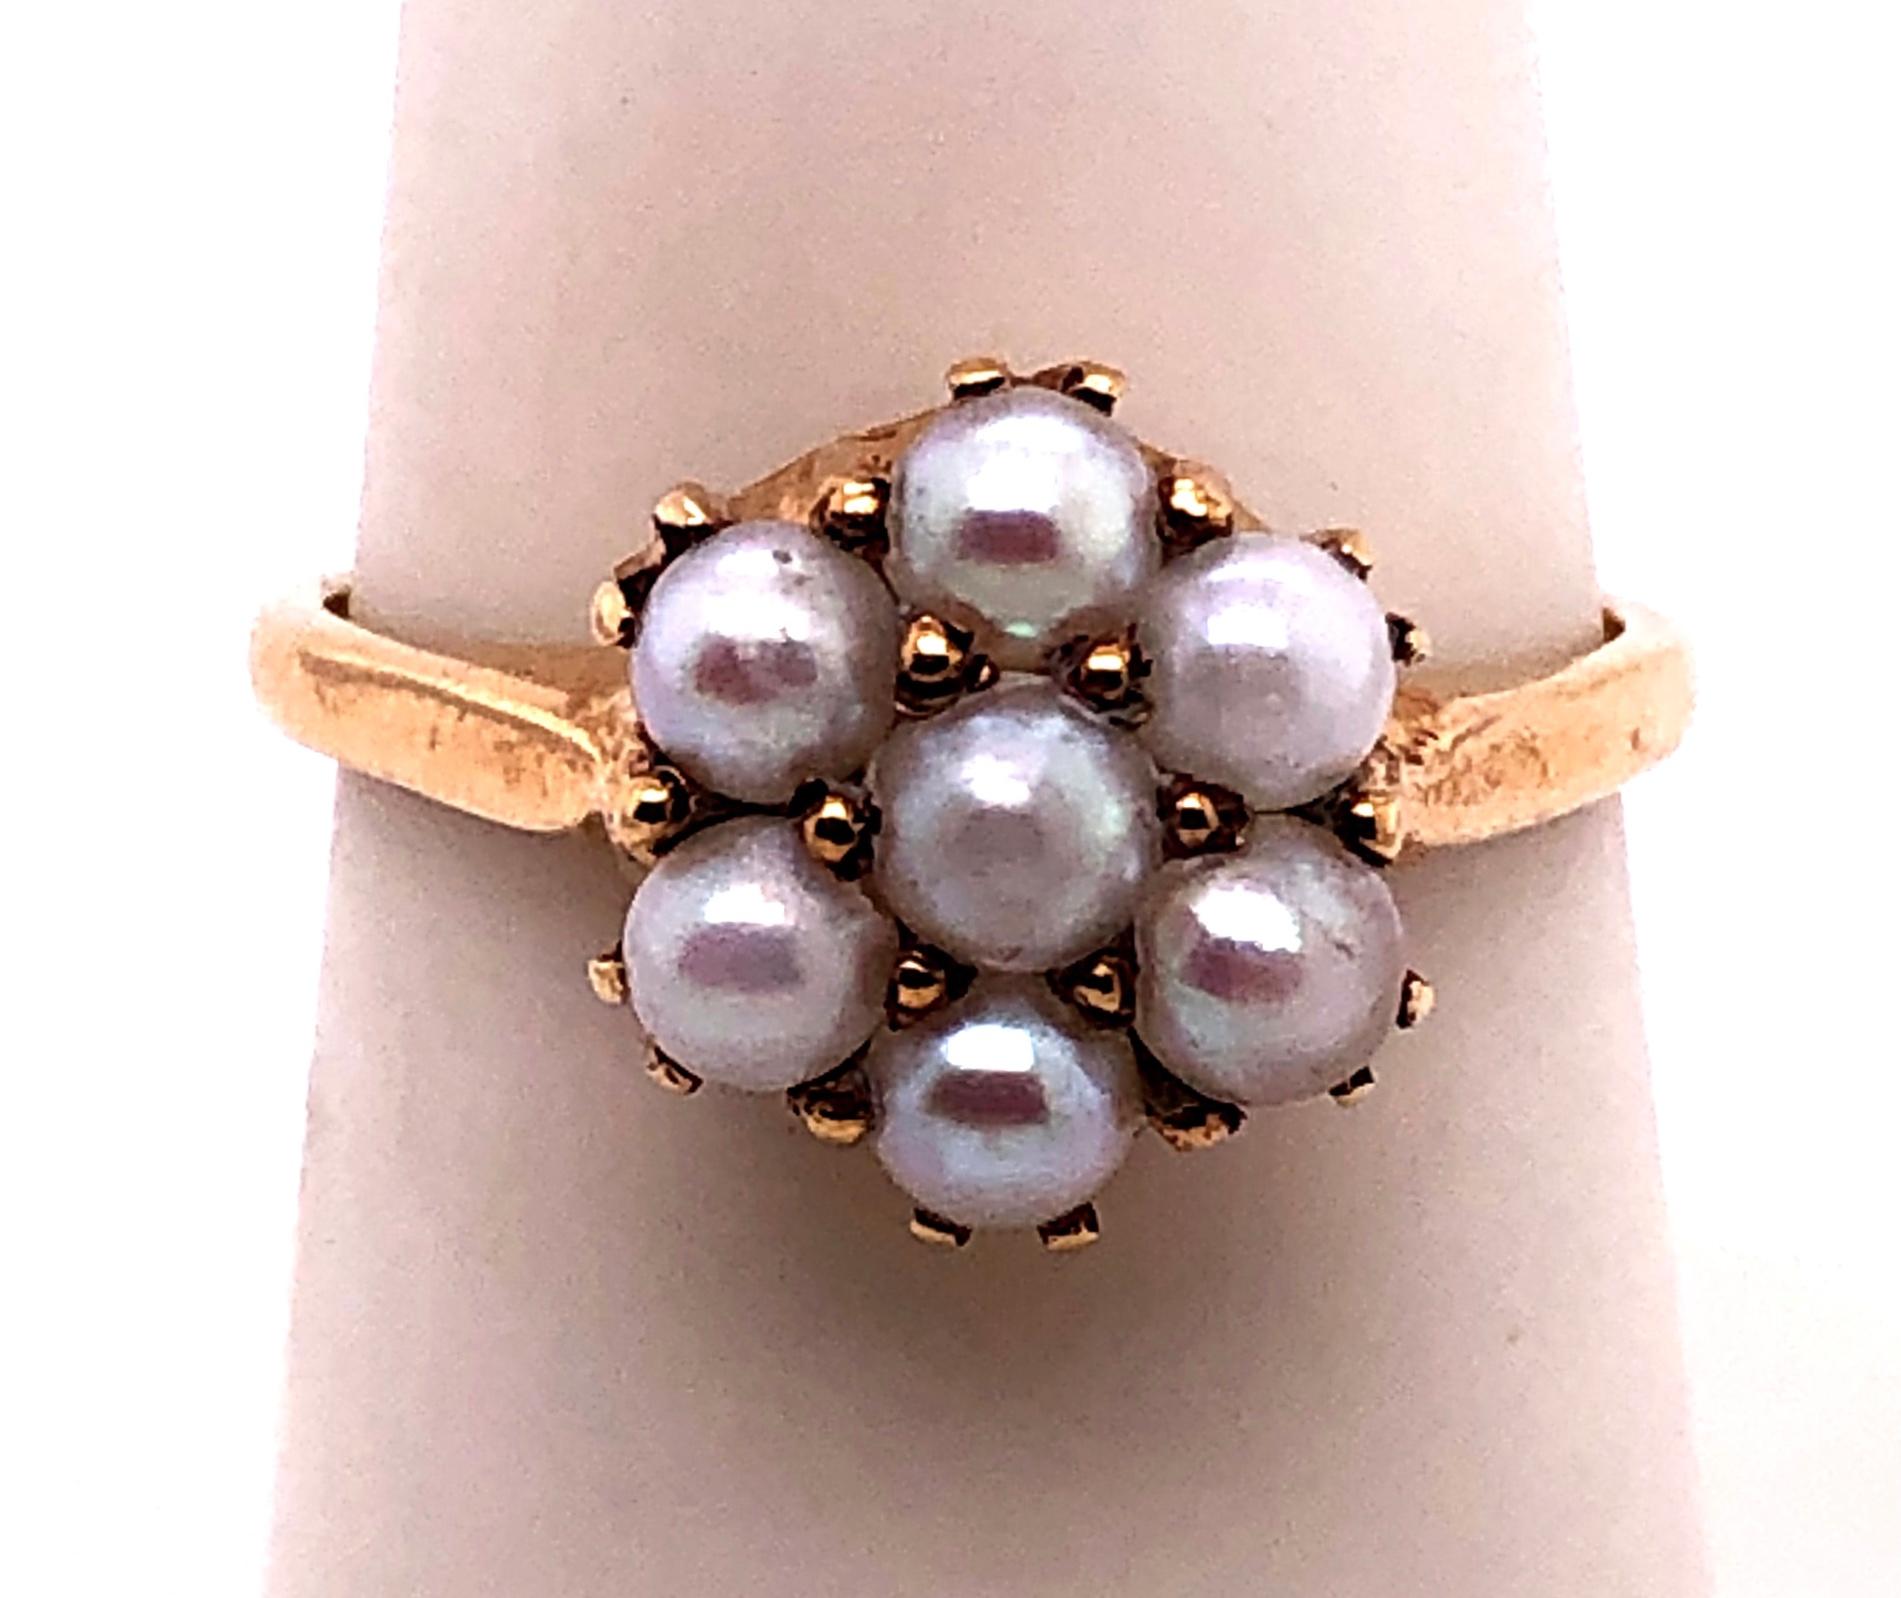 14 Karat Yellow Gold Cluster of Pearl Ring.
Size 7
2.9 grams total weight.
cluster of pearl 10 mm diameter.
Stamped 14K HAVEN on interior ring as shown. 
